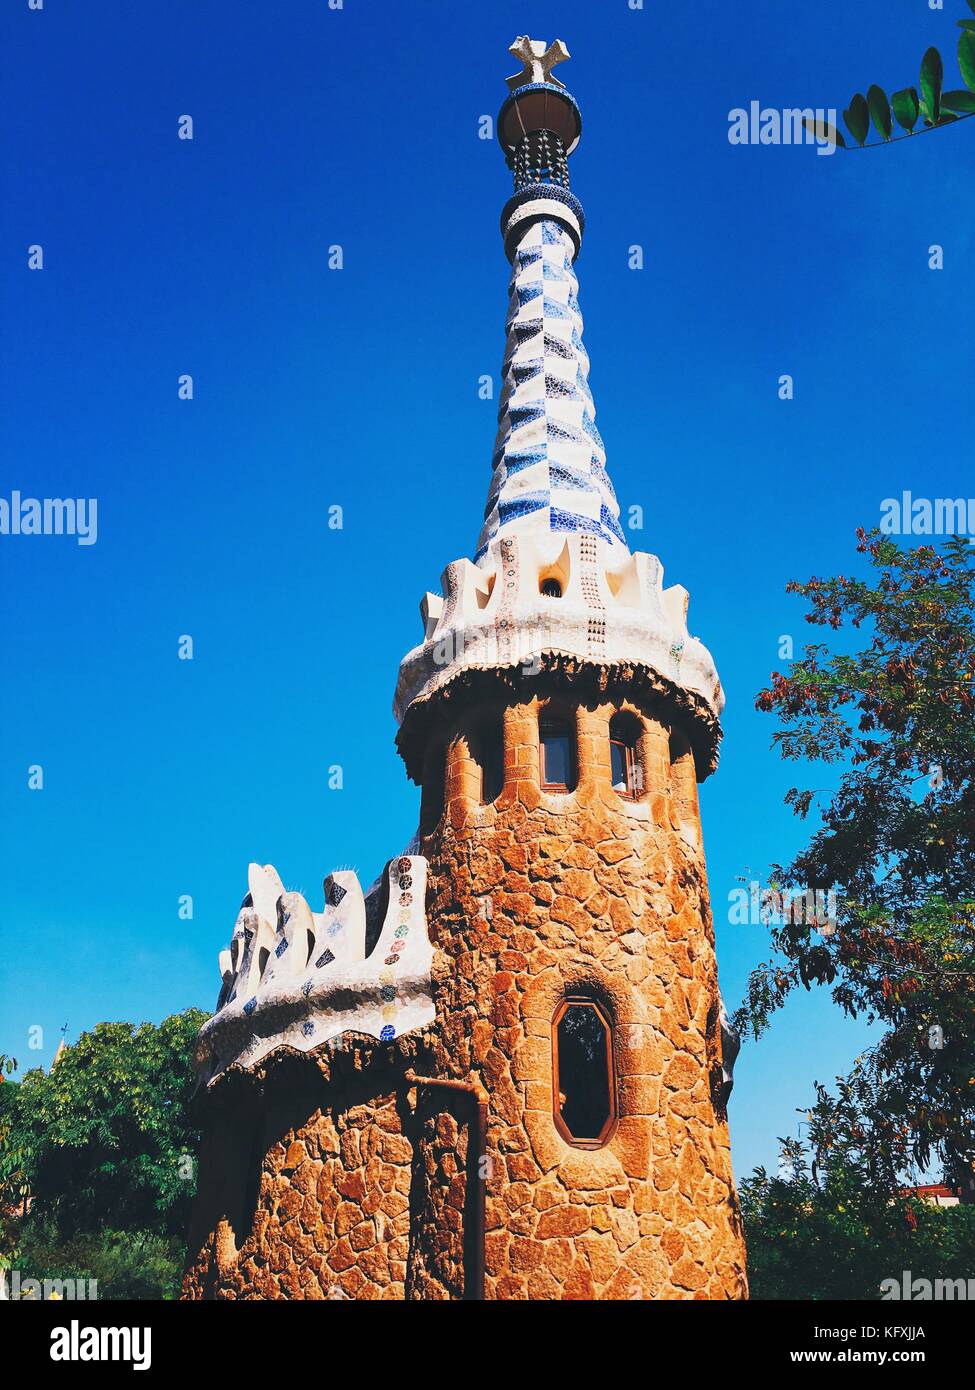 Fragments of the beautiful architecture in Park Guell. Parc Guell designed by Antoni Gaudi, is one of the world's most intriguing parks. Carmel Hill, Barcelona, Spain. Stock Photo